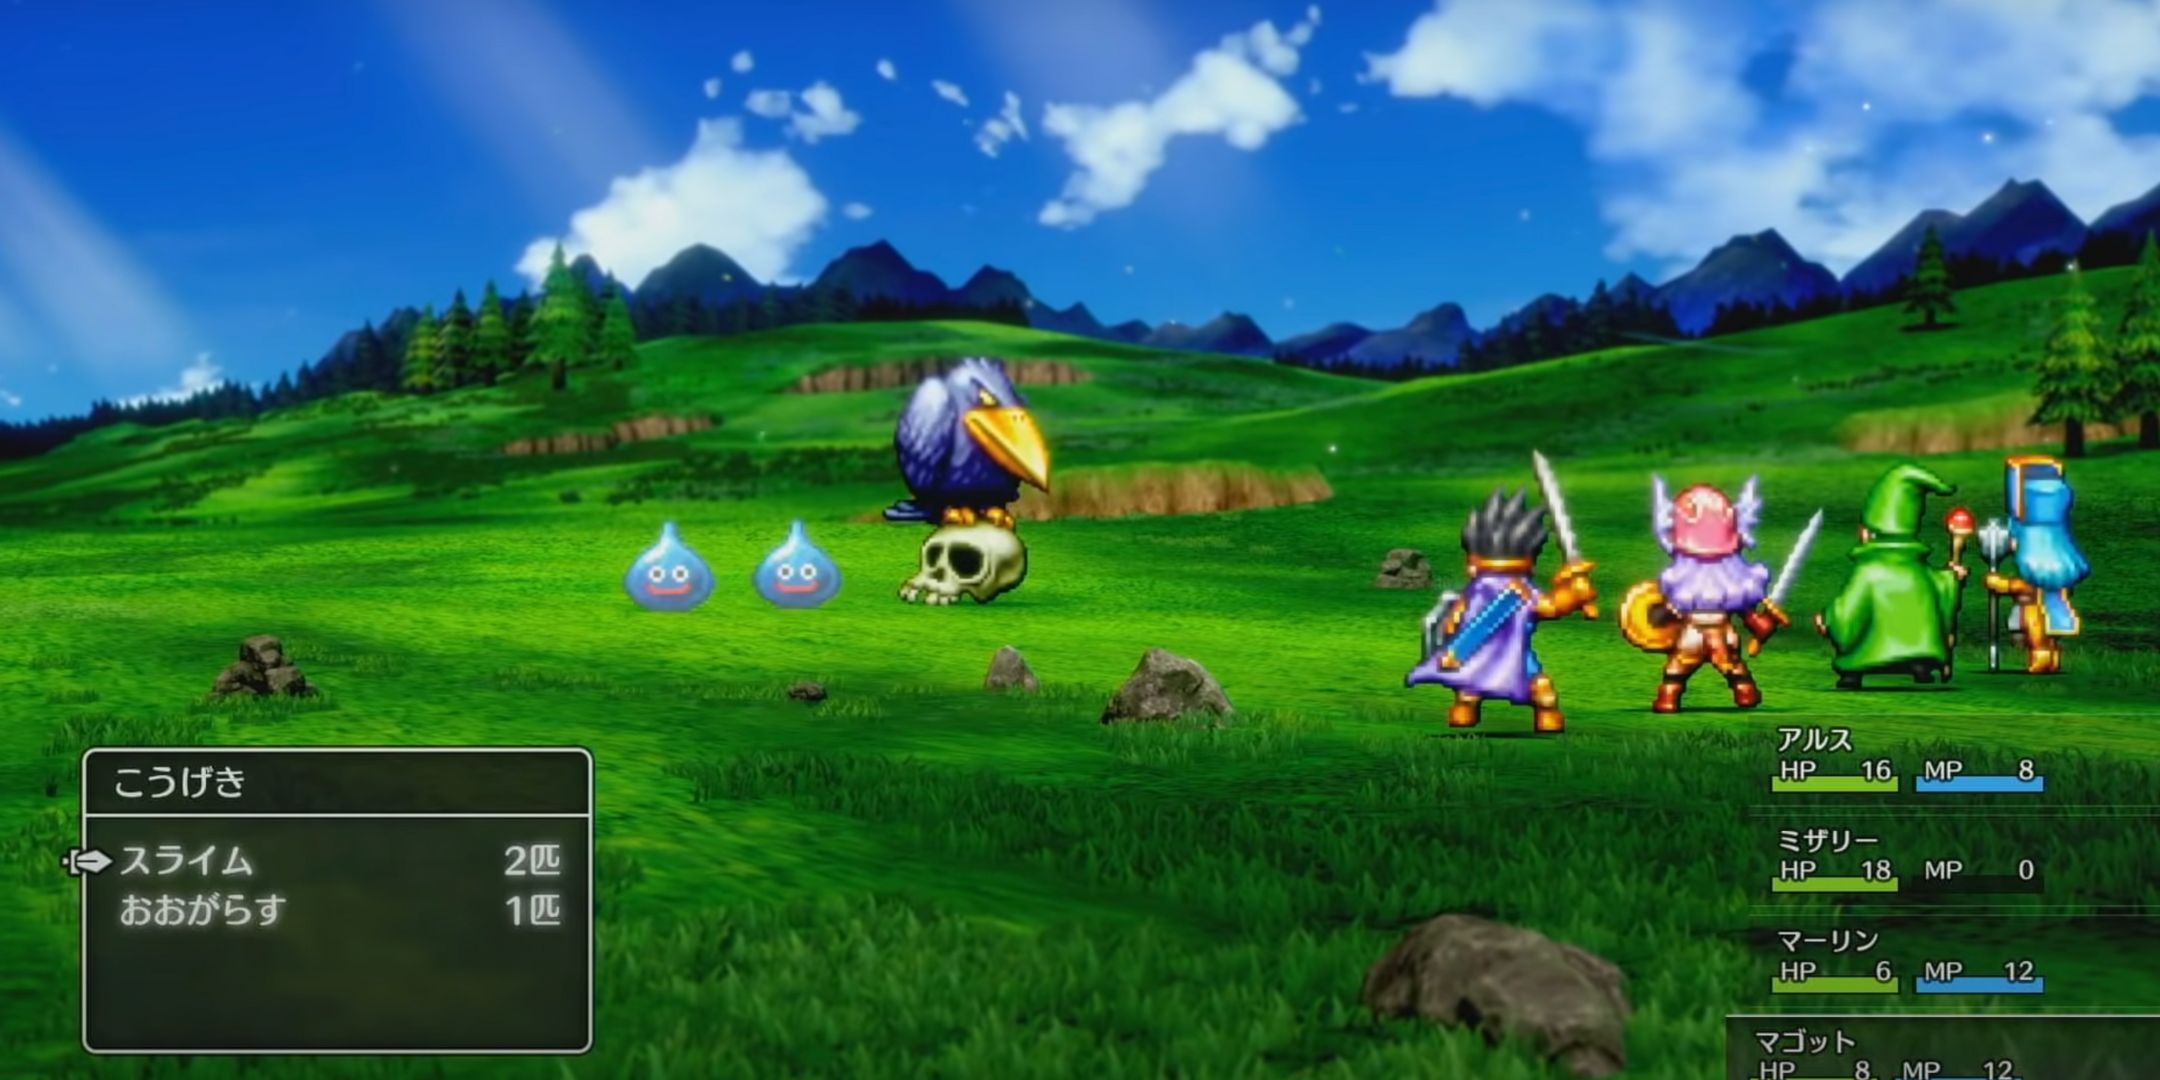 Gameplay of Dragon Quest 3 Remake in Japanese